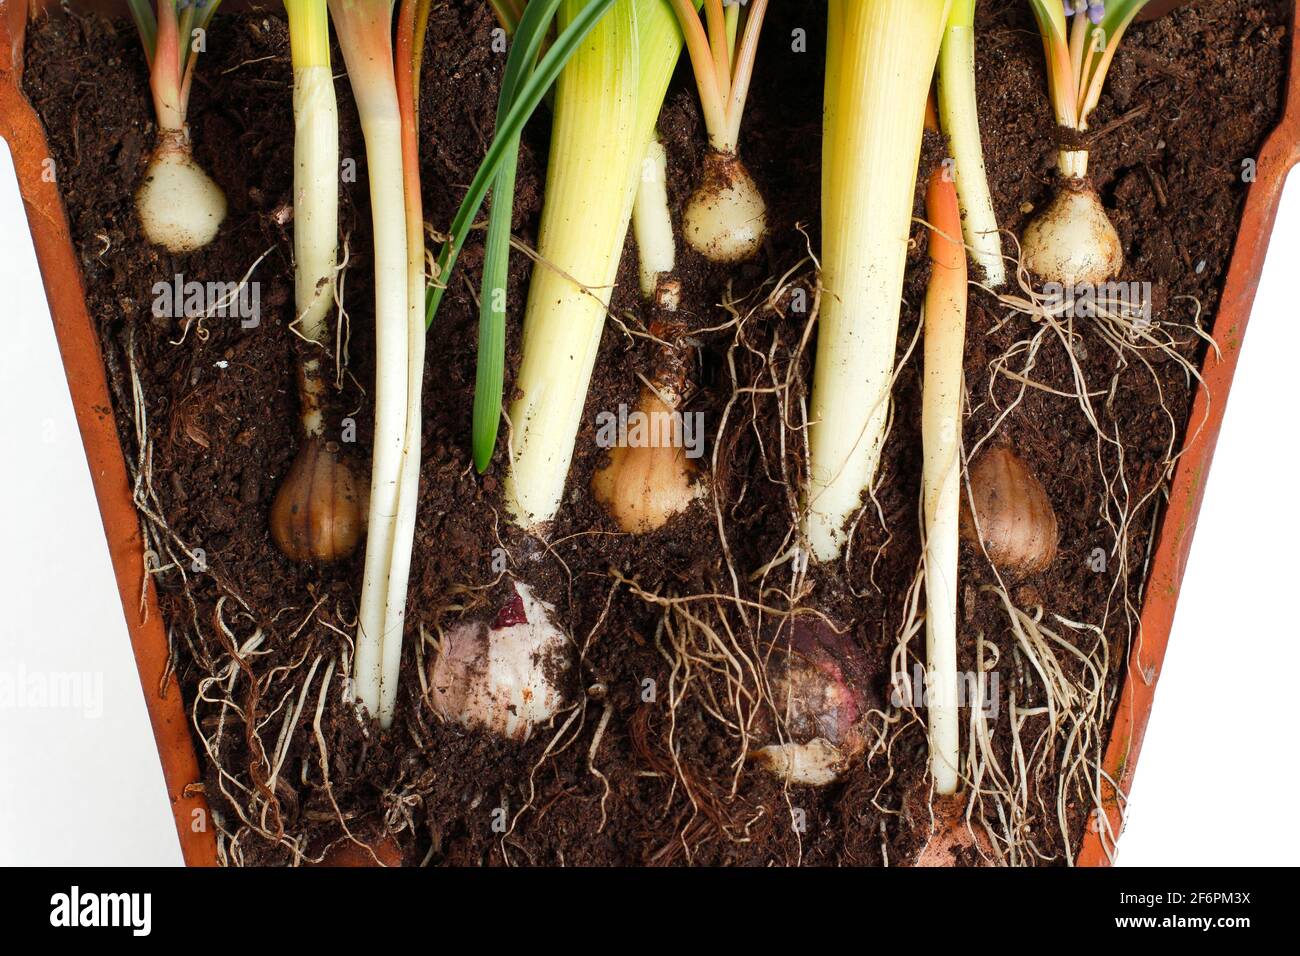 Bulb lasagne. Cross section to illustrate layering spring bulbs for a dense successional display. Top down - muscari, narcissus, hyacinth, tulip. Stock Photo